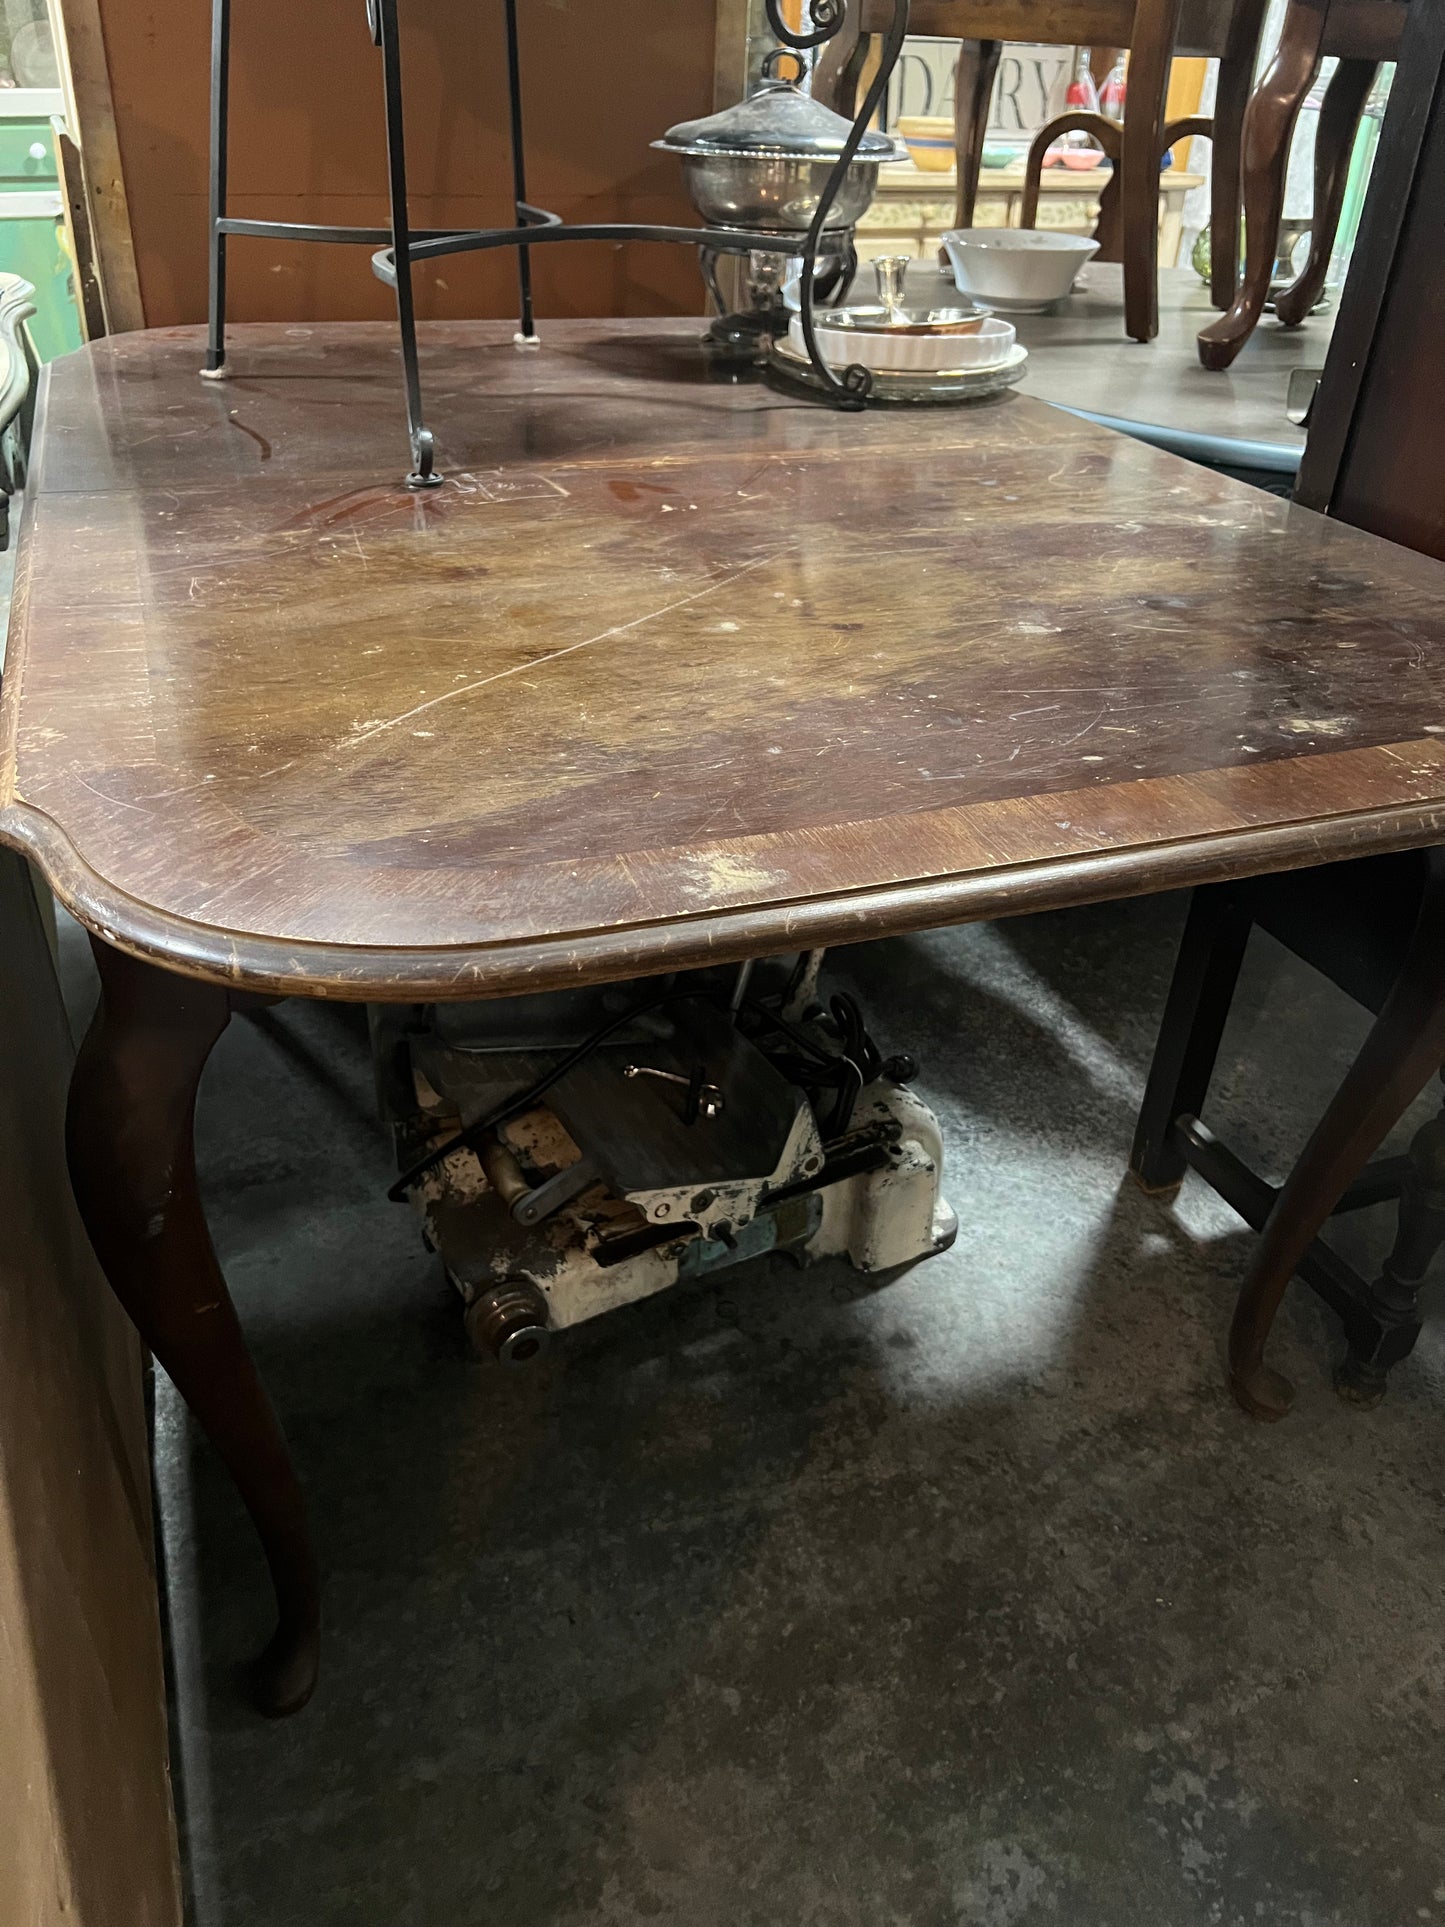 Queen Anne Style Dining Table